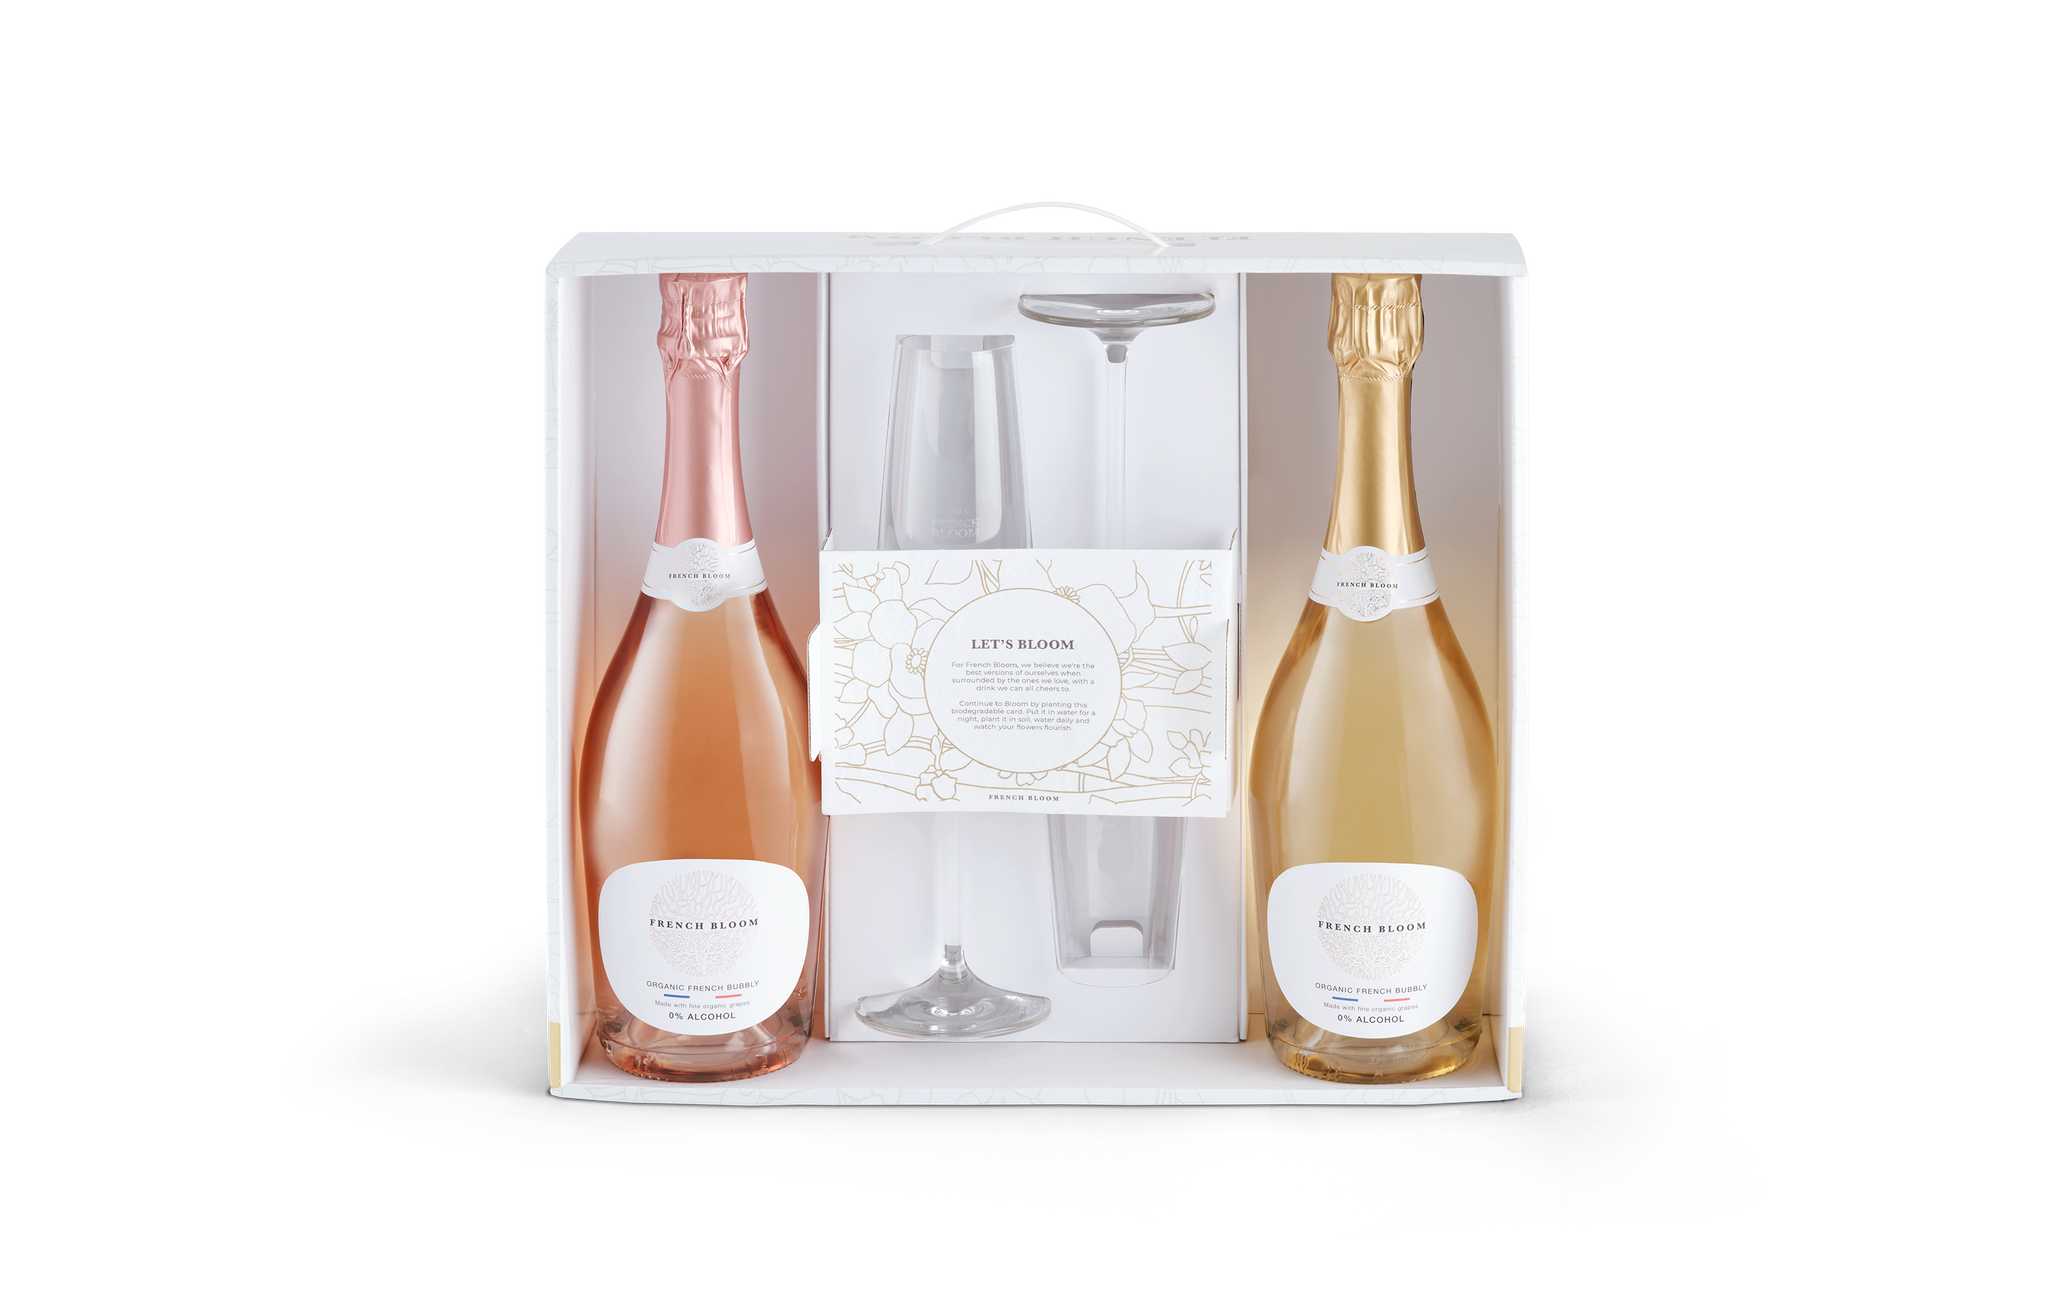 French Bloom Le Blanc 0.0% Duo Pack